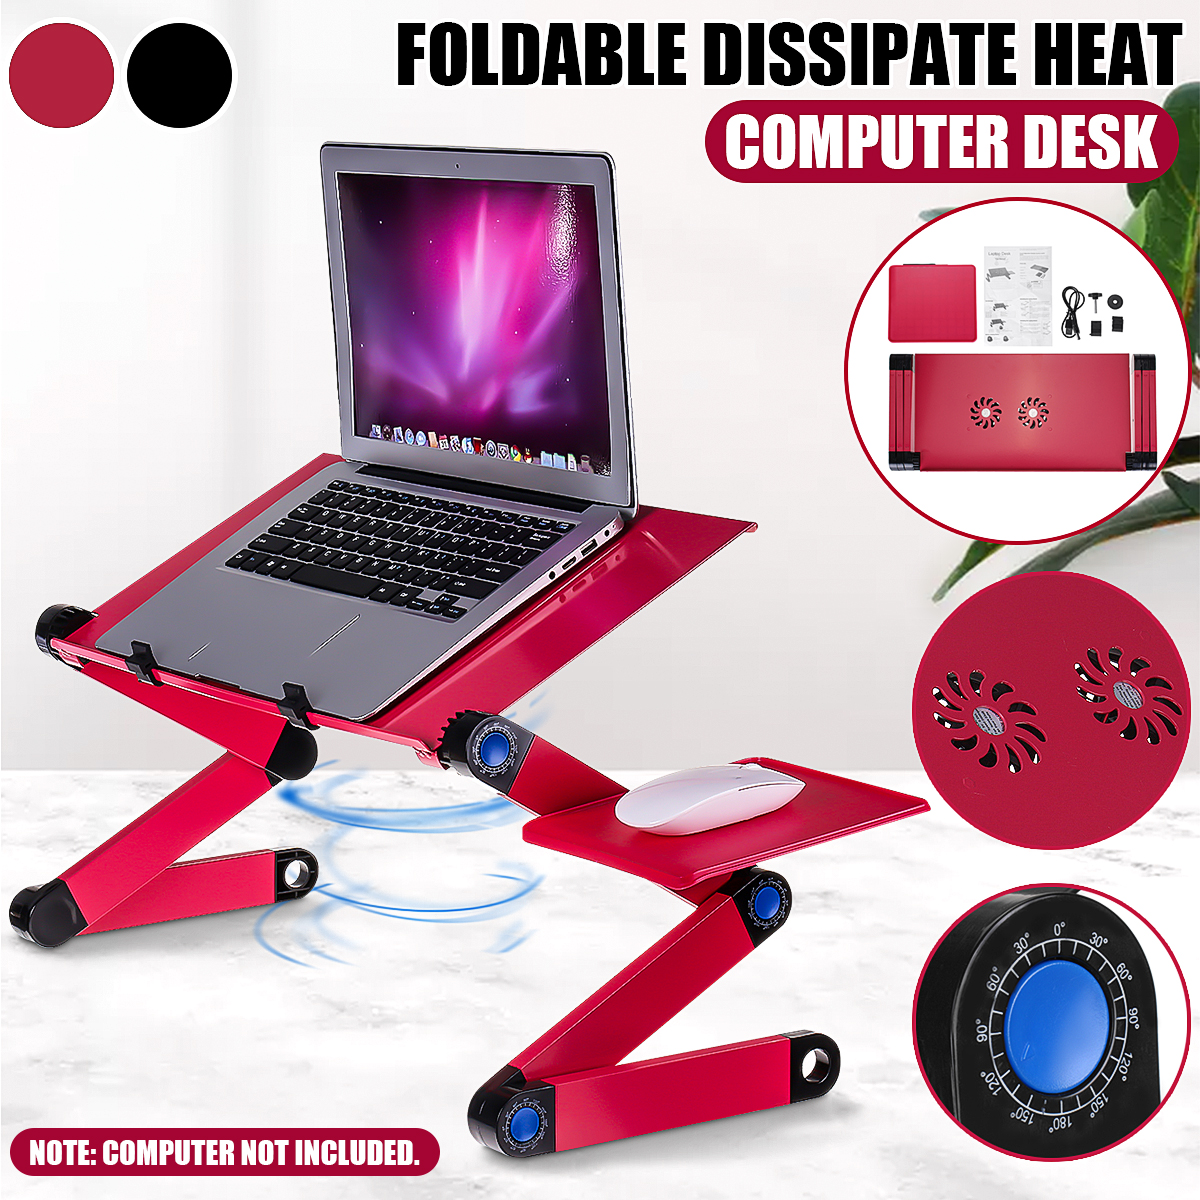 Cooling-Laptop-Desk-360-Degree-Aluminum-Alloy-Adjustable-Foldable-Cooling-Notebook-Table-for-Sofa-Be-1786133-3